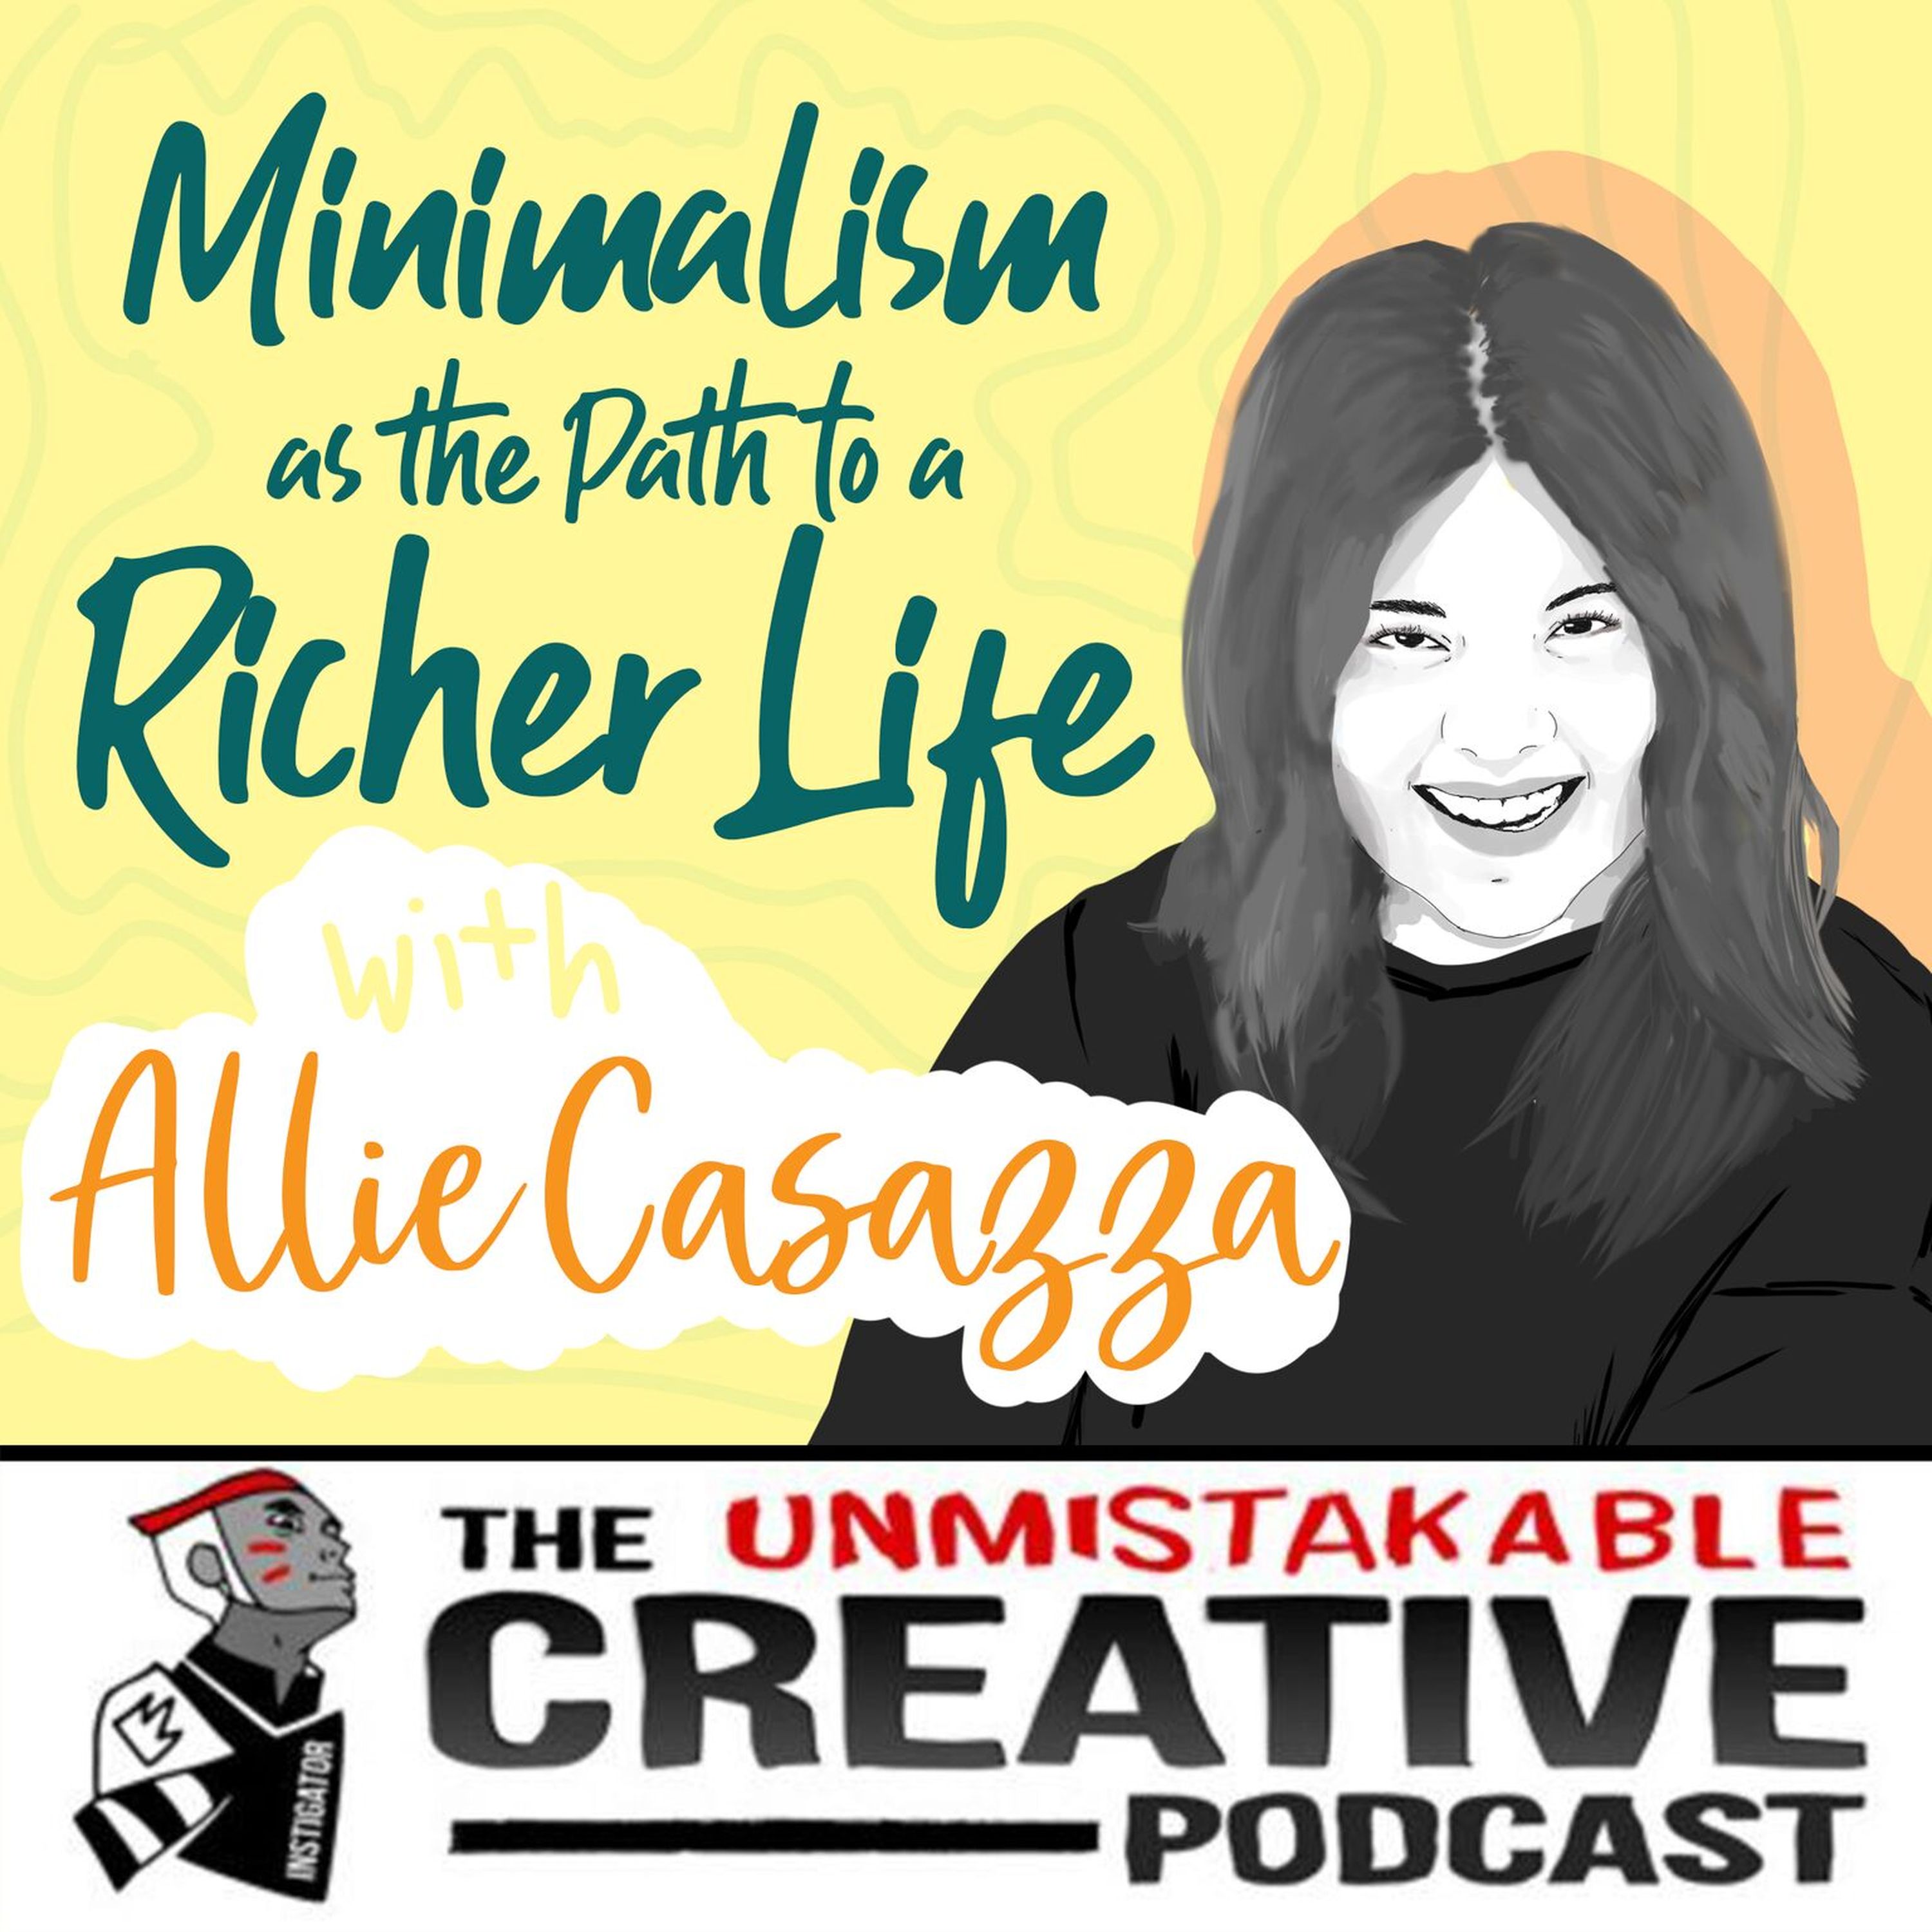 Minimalism as The Path to a Richer Life with Allie Casazza